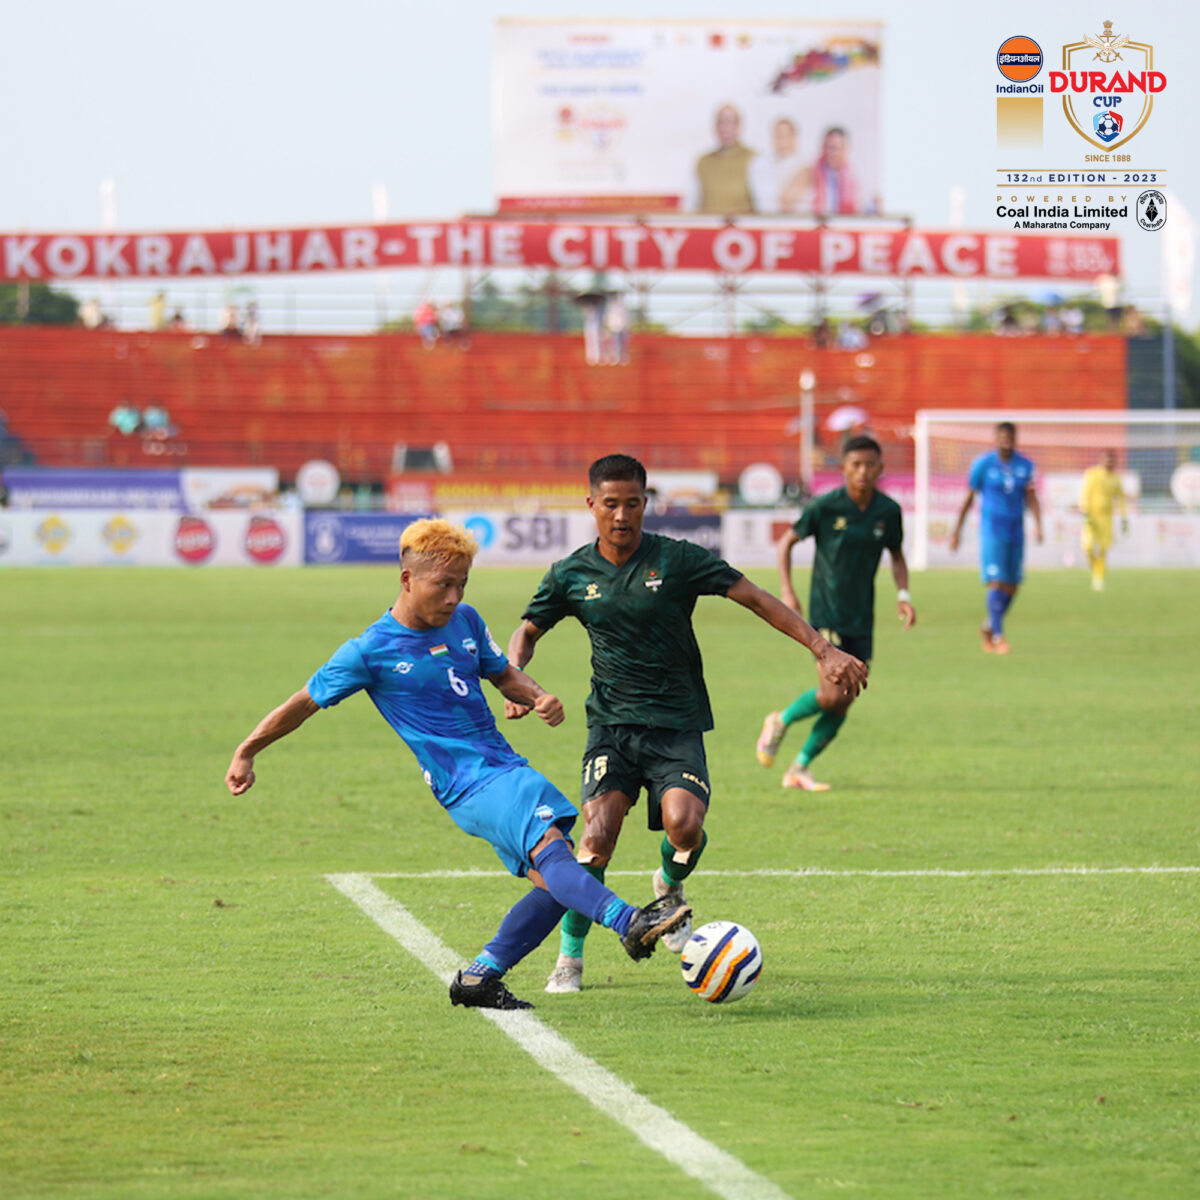 132nd IndianOil Durand Cup Match Report: Gokulam Kerala scores a brace against the Indian Air Force Football Team